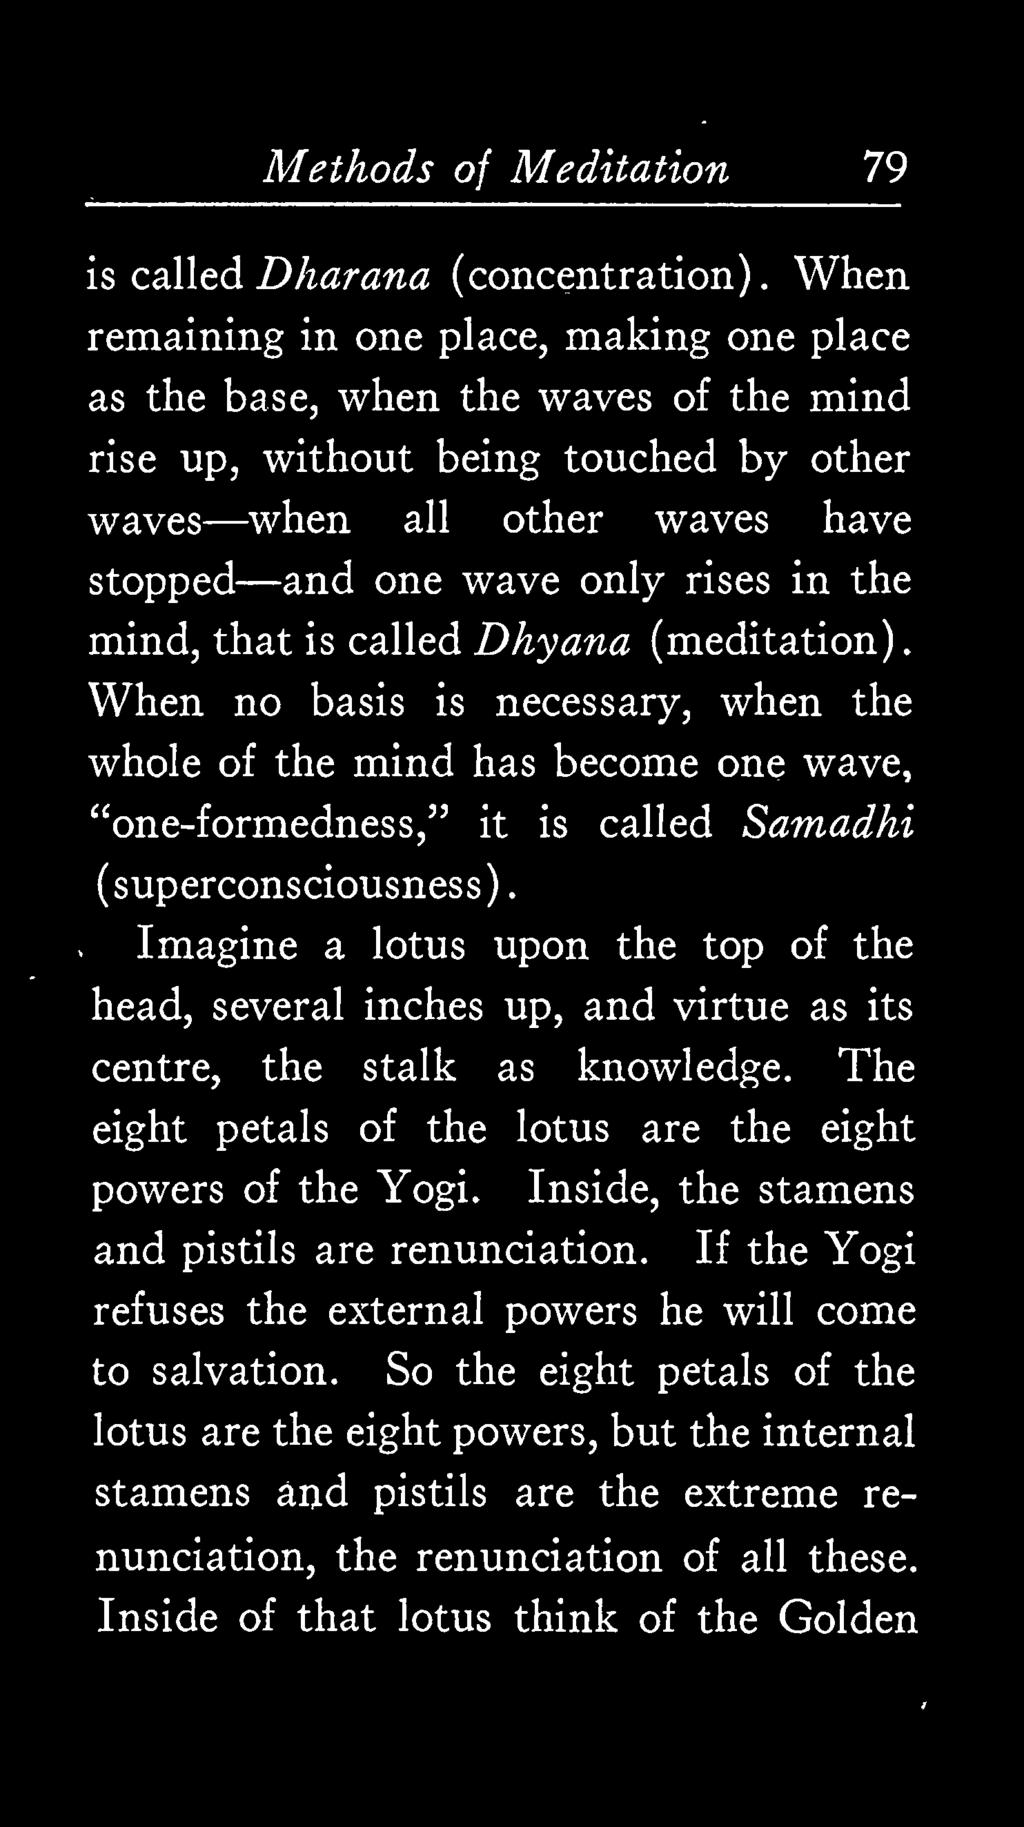 mind, that is called Dhyana (meditation). When no basis is necessary, when the whole of the mind has become one wave, "one-formedness," it is called Samadhi (superconsciousness).